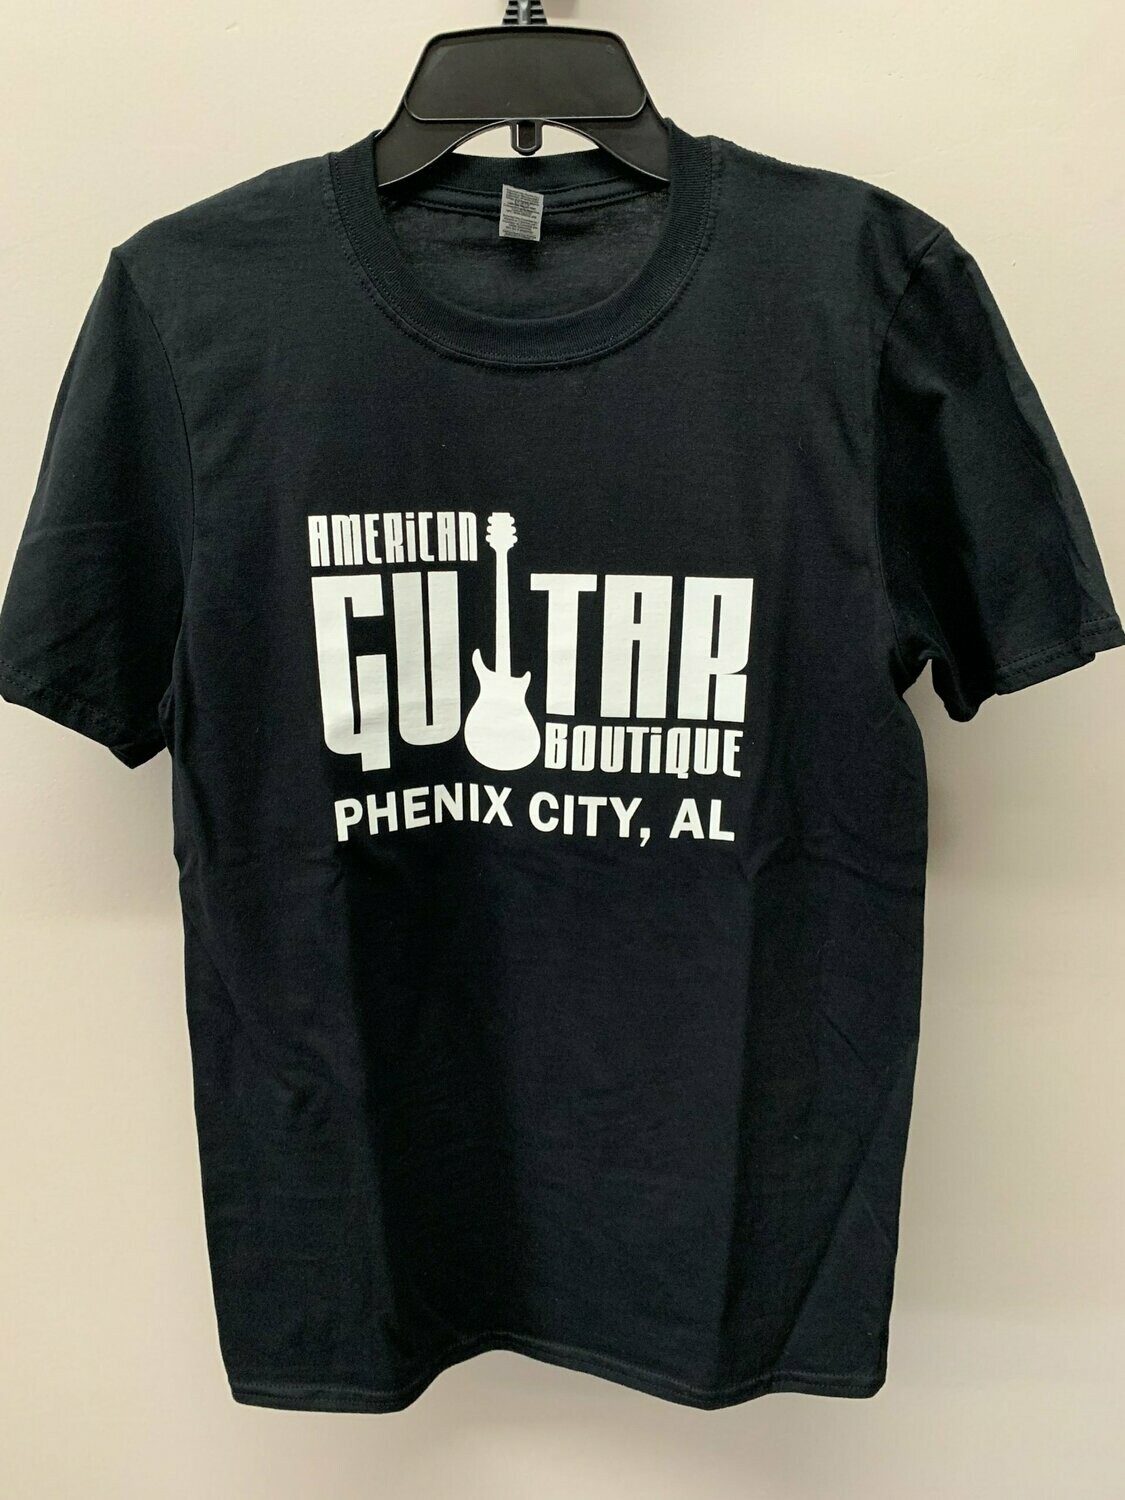 American Guitar Boutique T-Shirt - SMALL